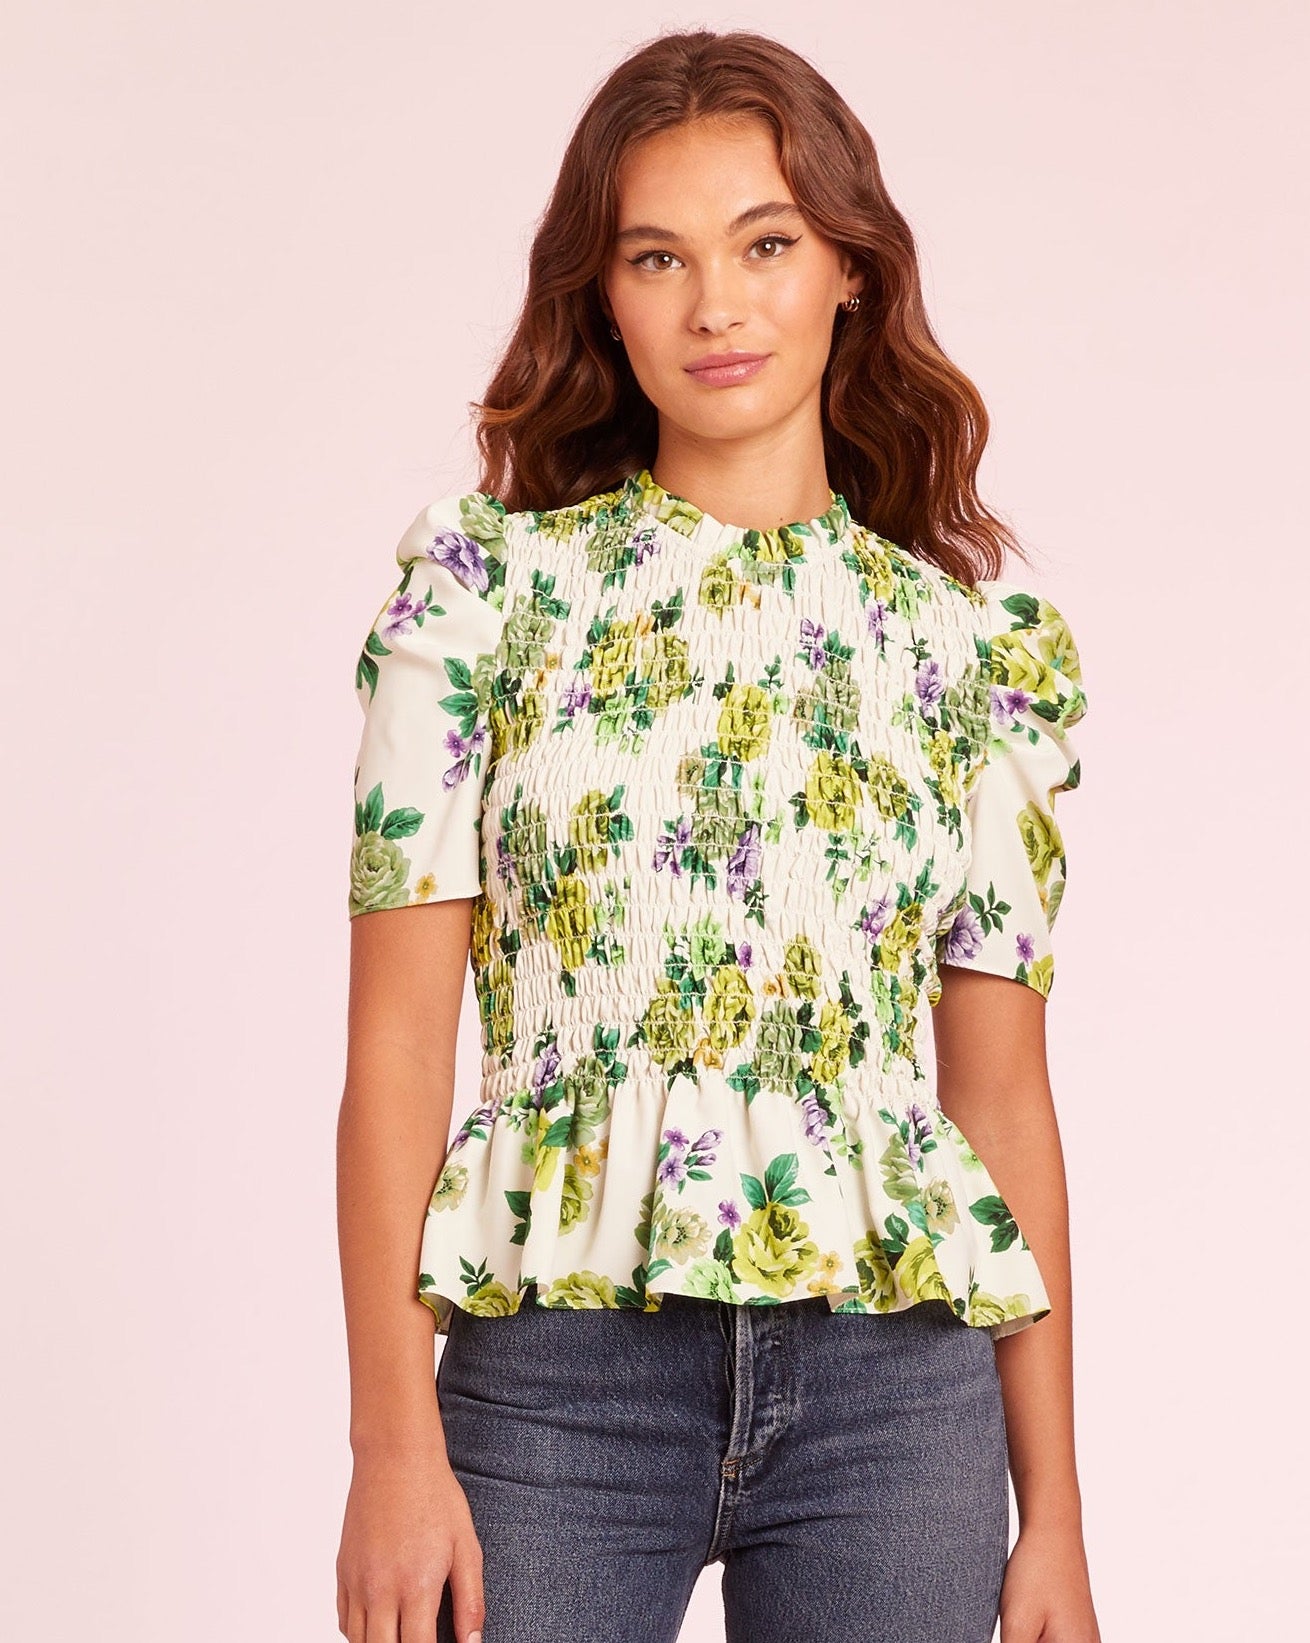 Floral pattern, smocked bodice top. Gathered puff sleeves. This top gives Italian countryside vibes! Amanda Uprichard.